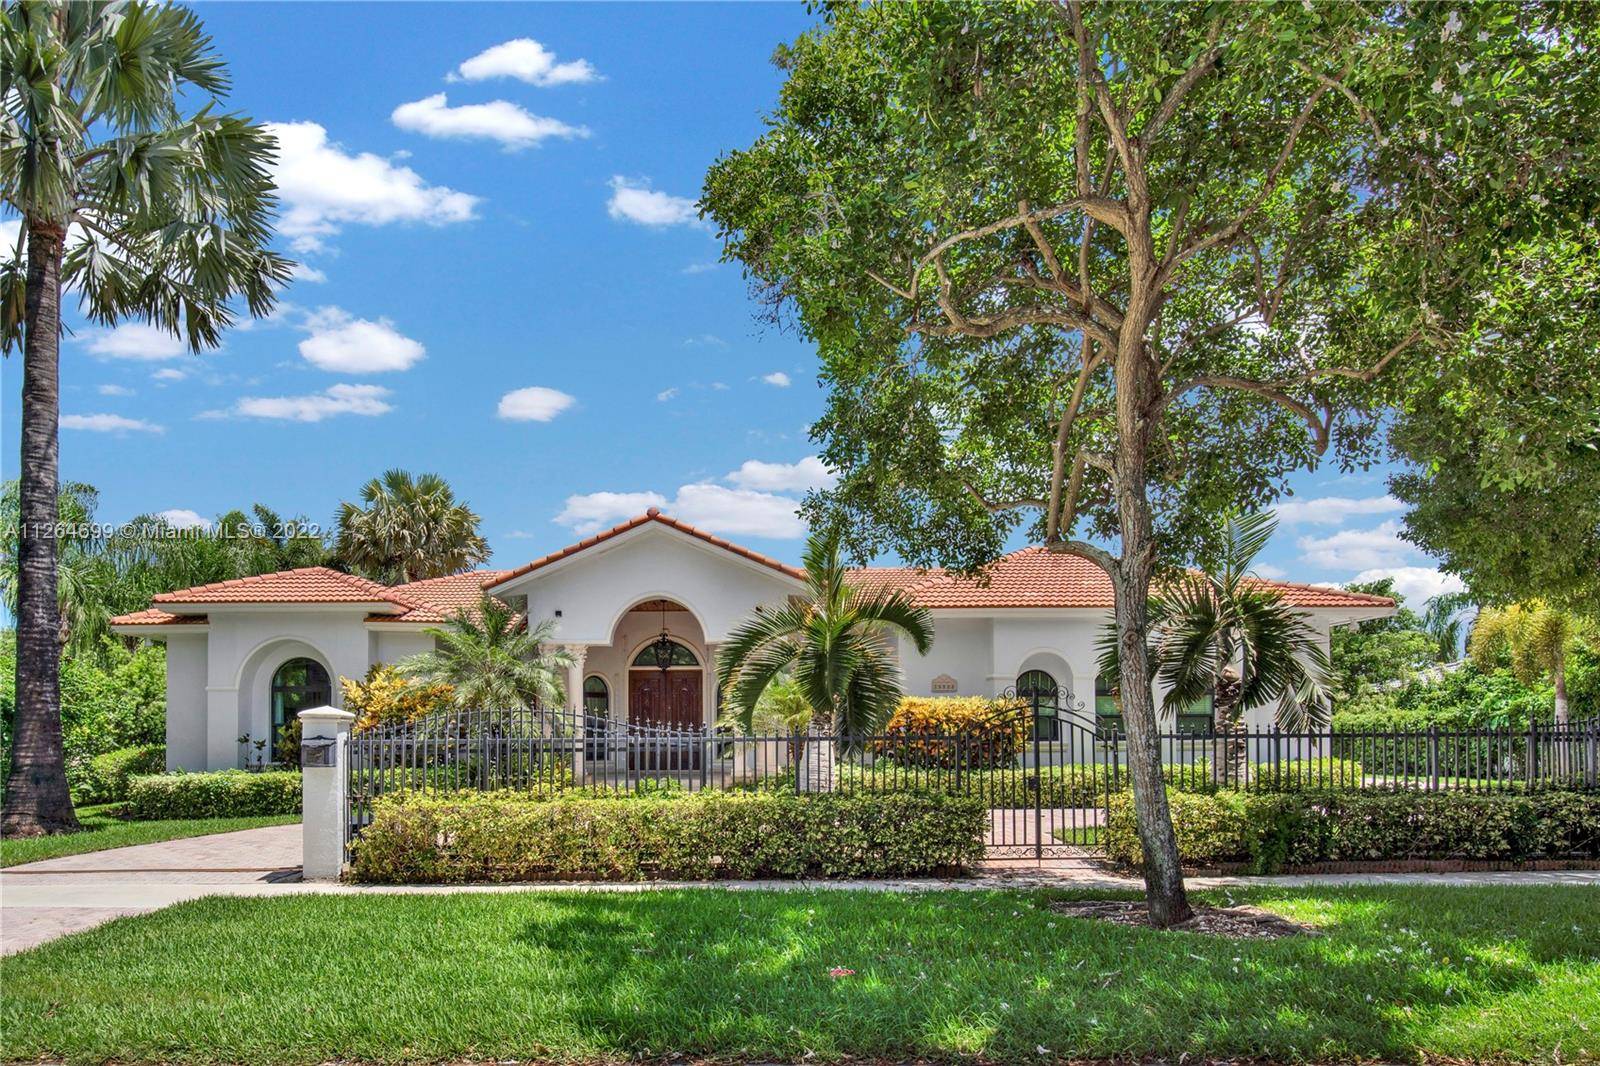 Welcome to this fabulous gated residence, boasting a grand entrance with exquisite wood double doors and stunning marble floors in the foyer.